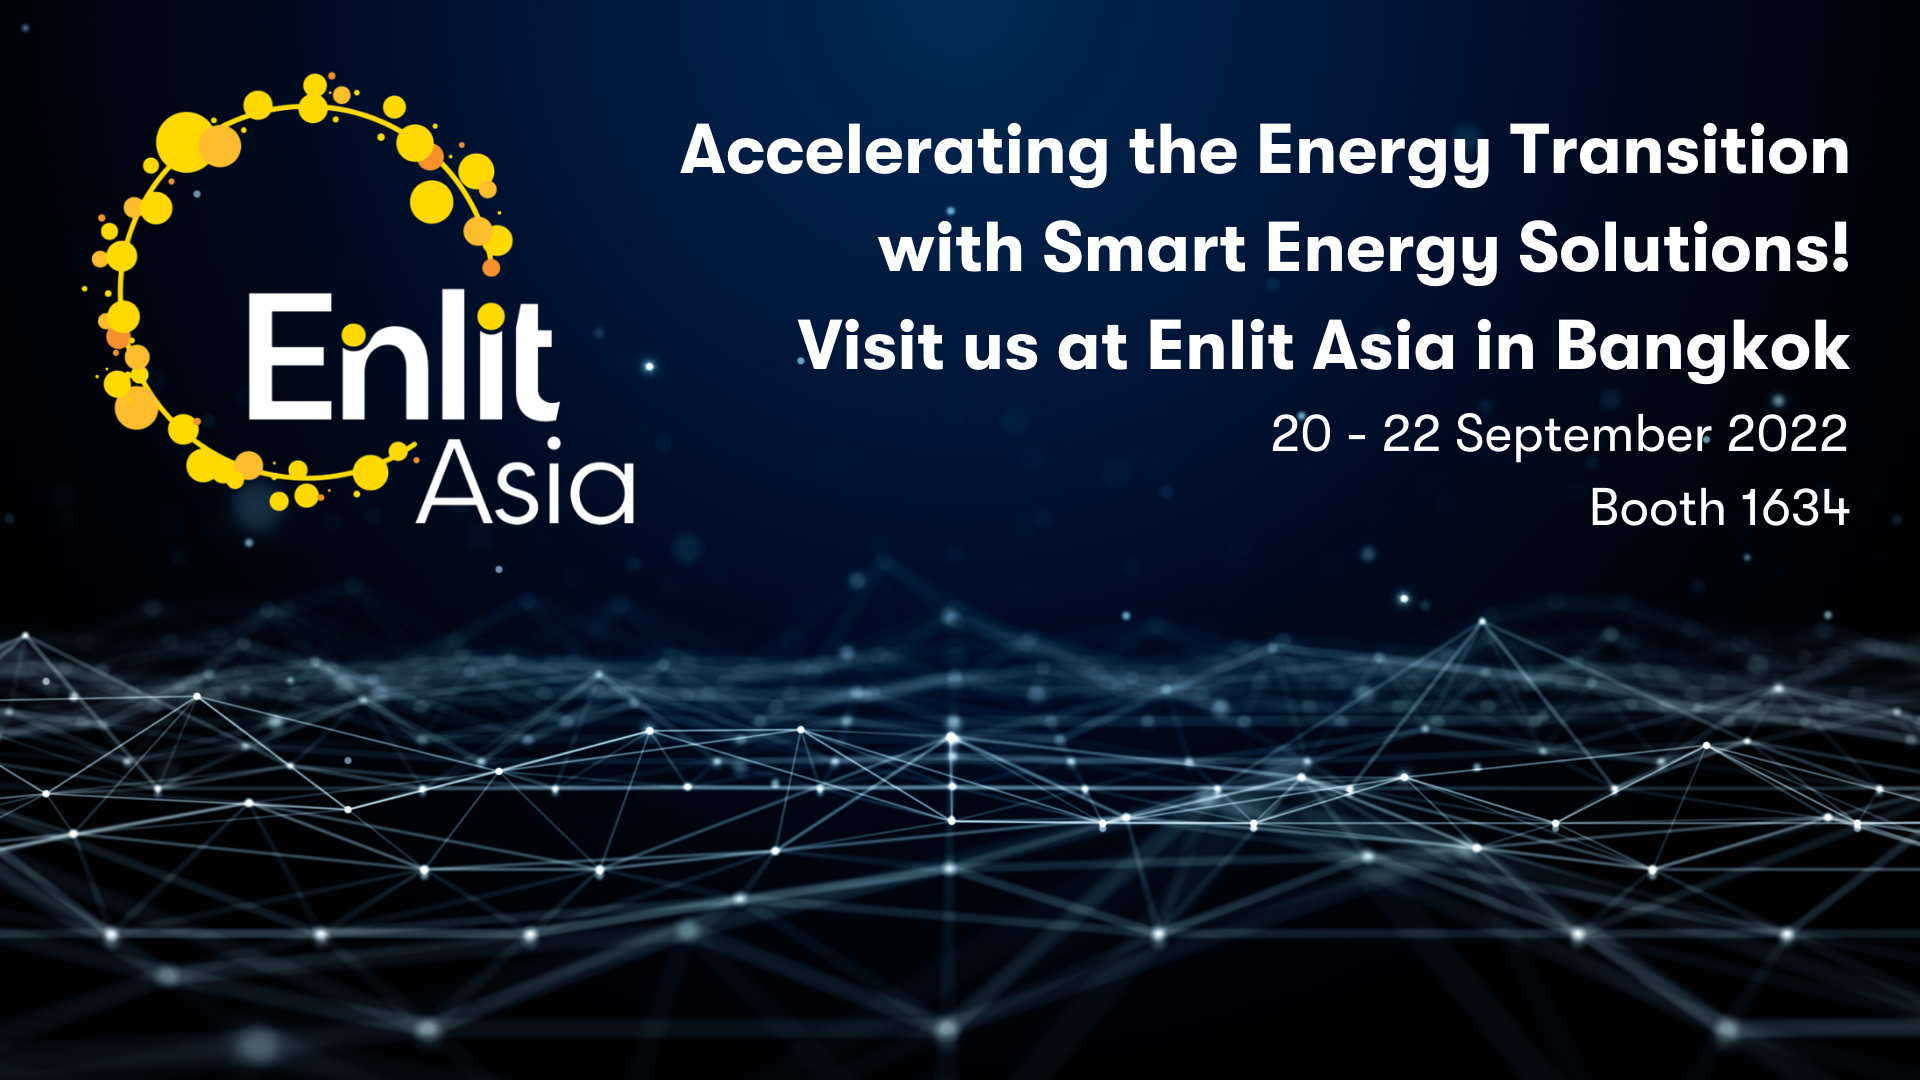 uploads/pics/https://systemtechnologies.iqony.energy/uploads/pics/Accelerating_the_Energy_Transition_with_Smart_Digital_Solutions_Visit_us_at_Enlit_Asia_in_Bangkok__1__21.png